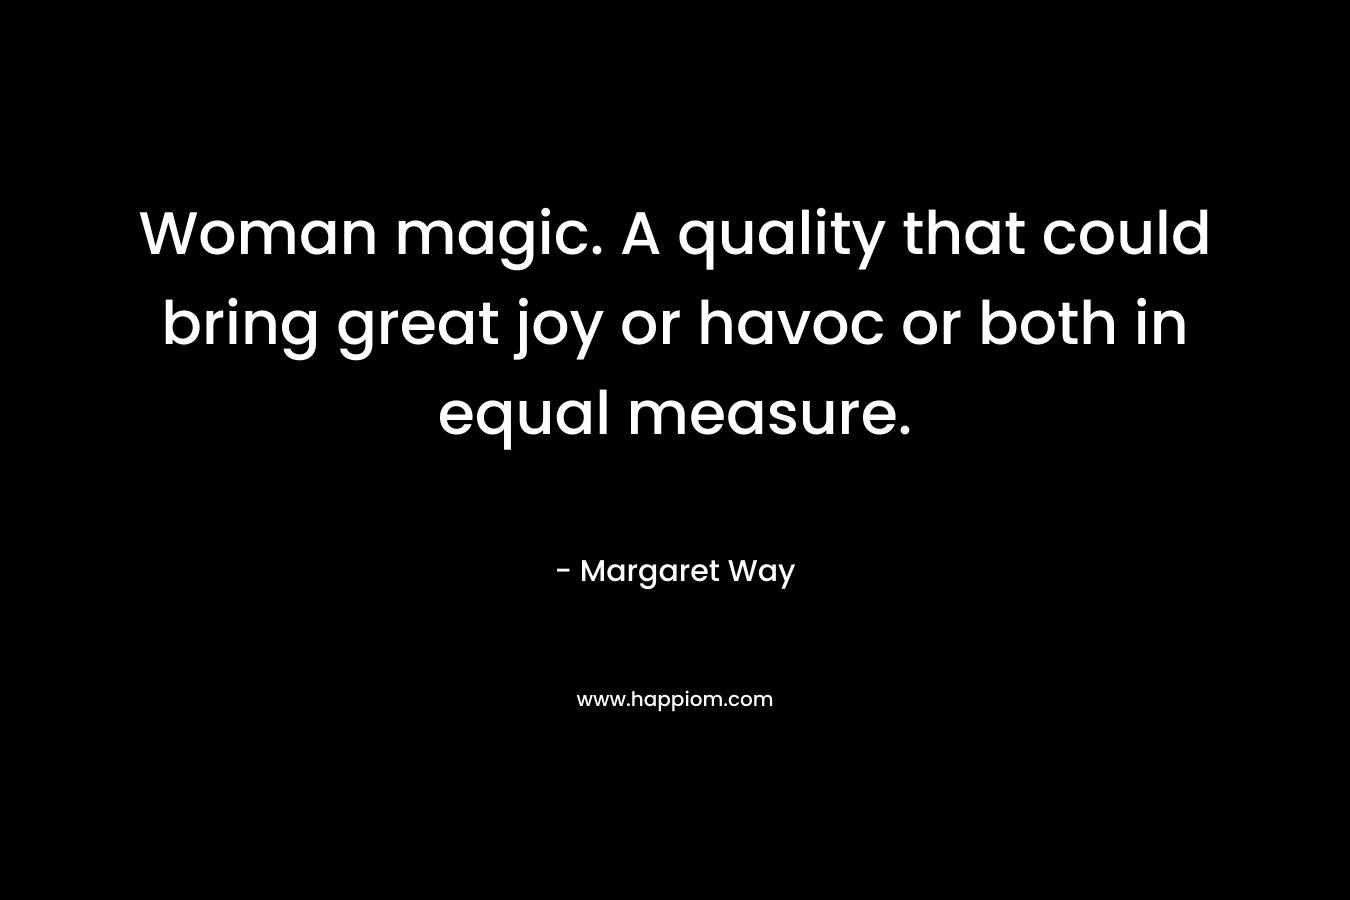 Woman magic. A quality that could bring great joy or havoc or both in equal measure.